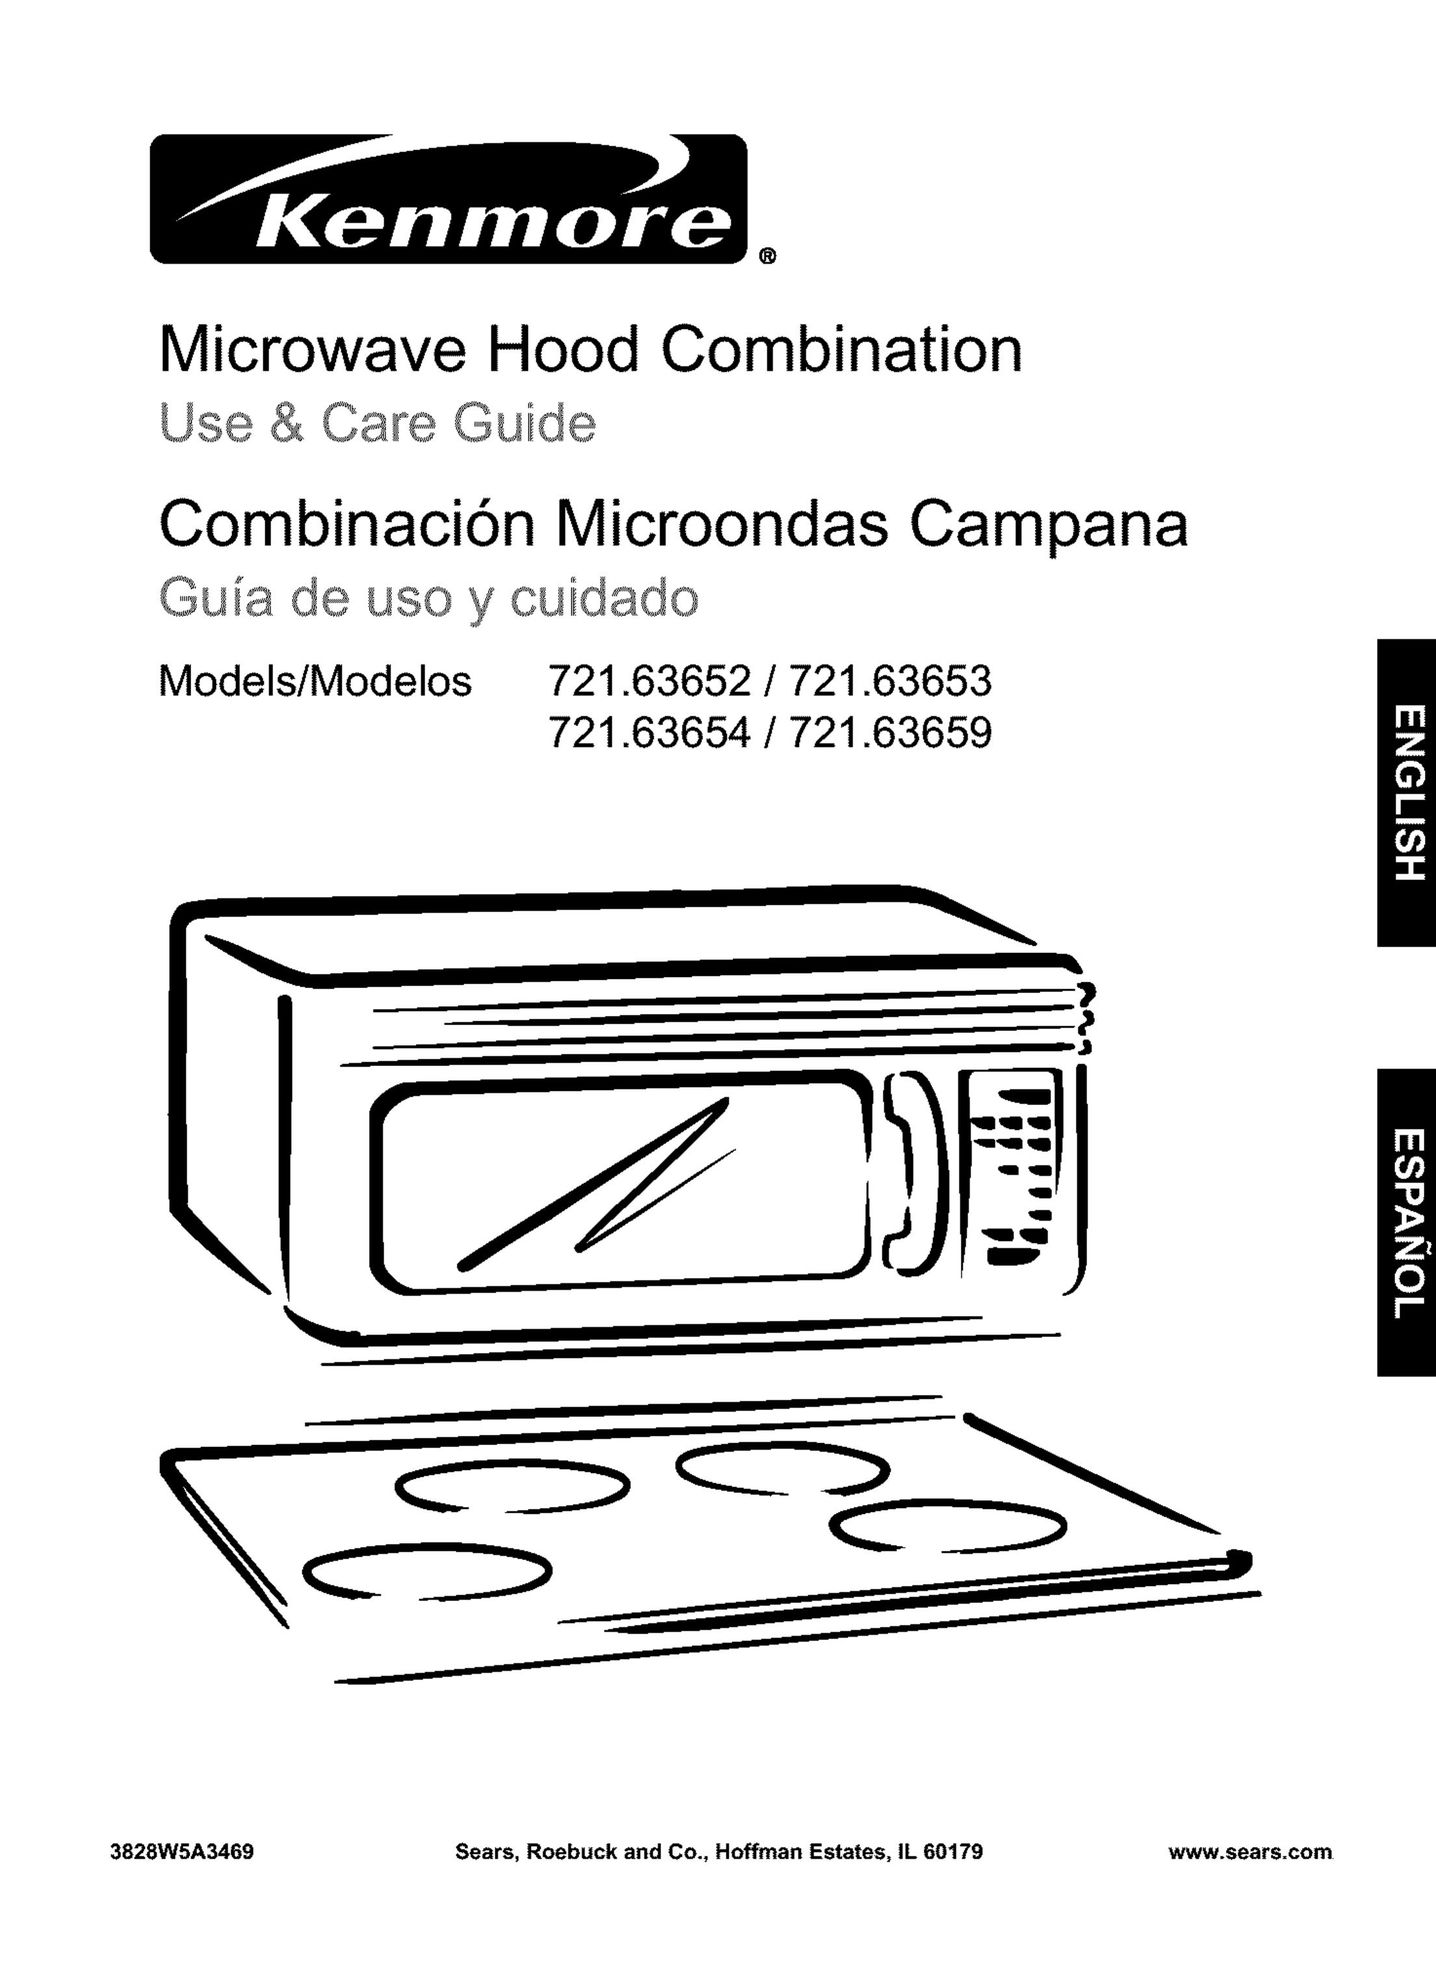 Kenmore 721.63652 Microwave Oven User Manual